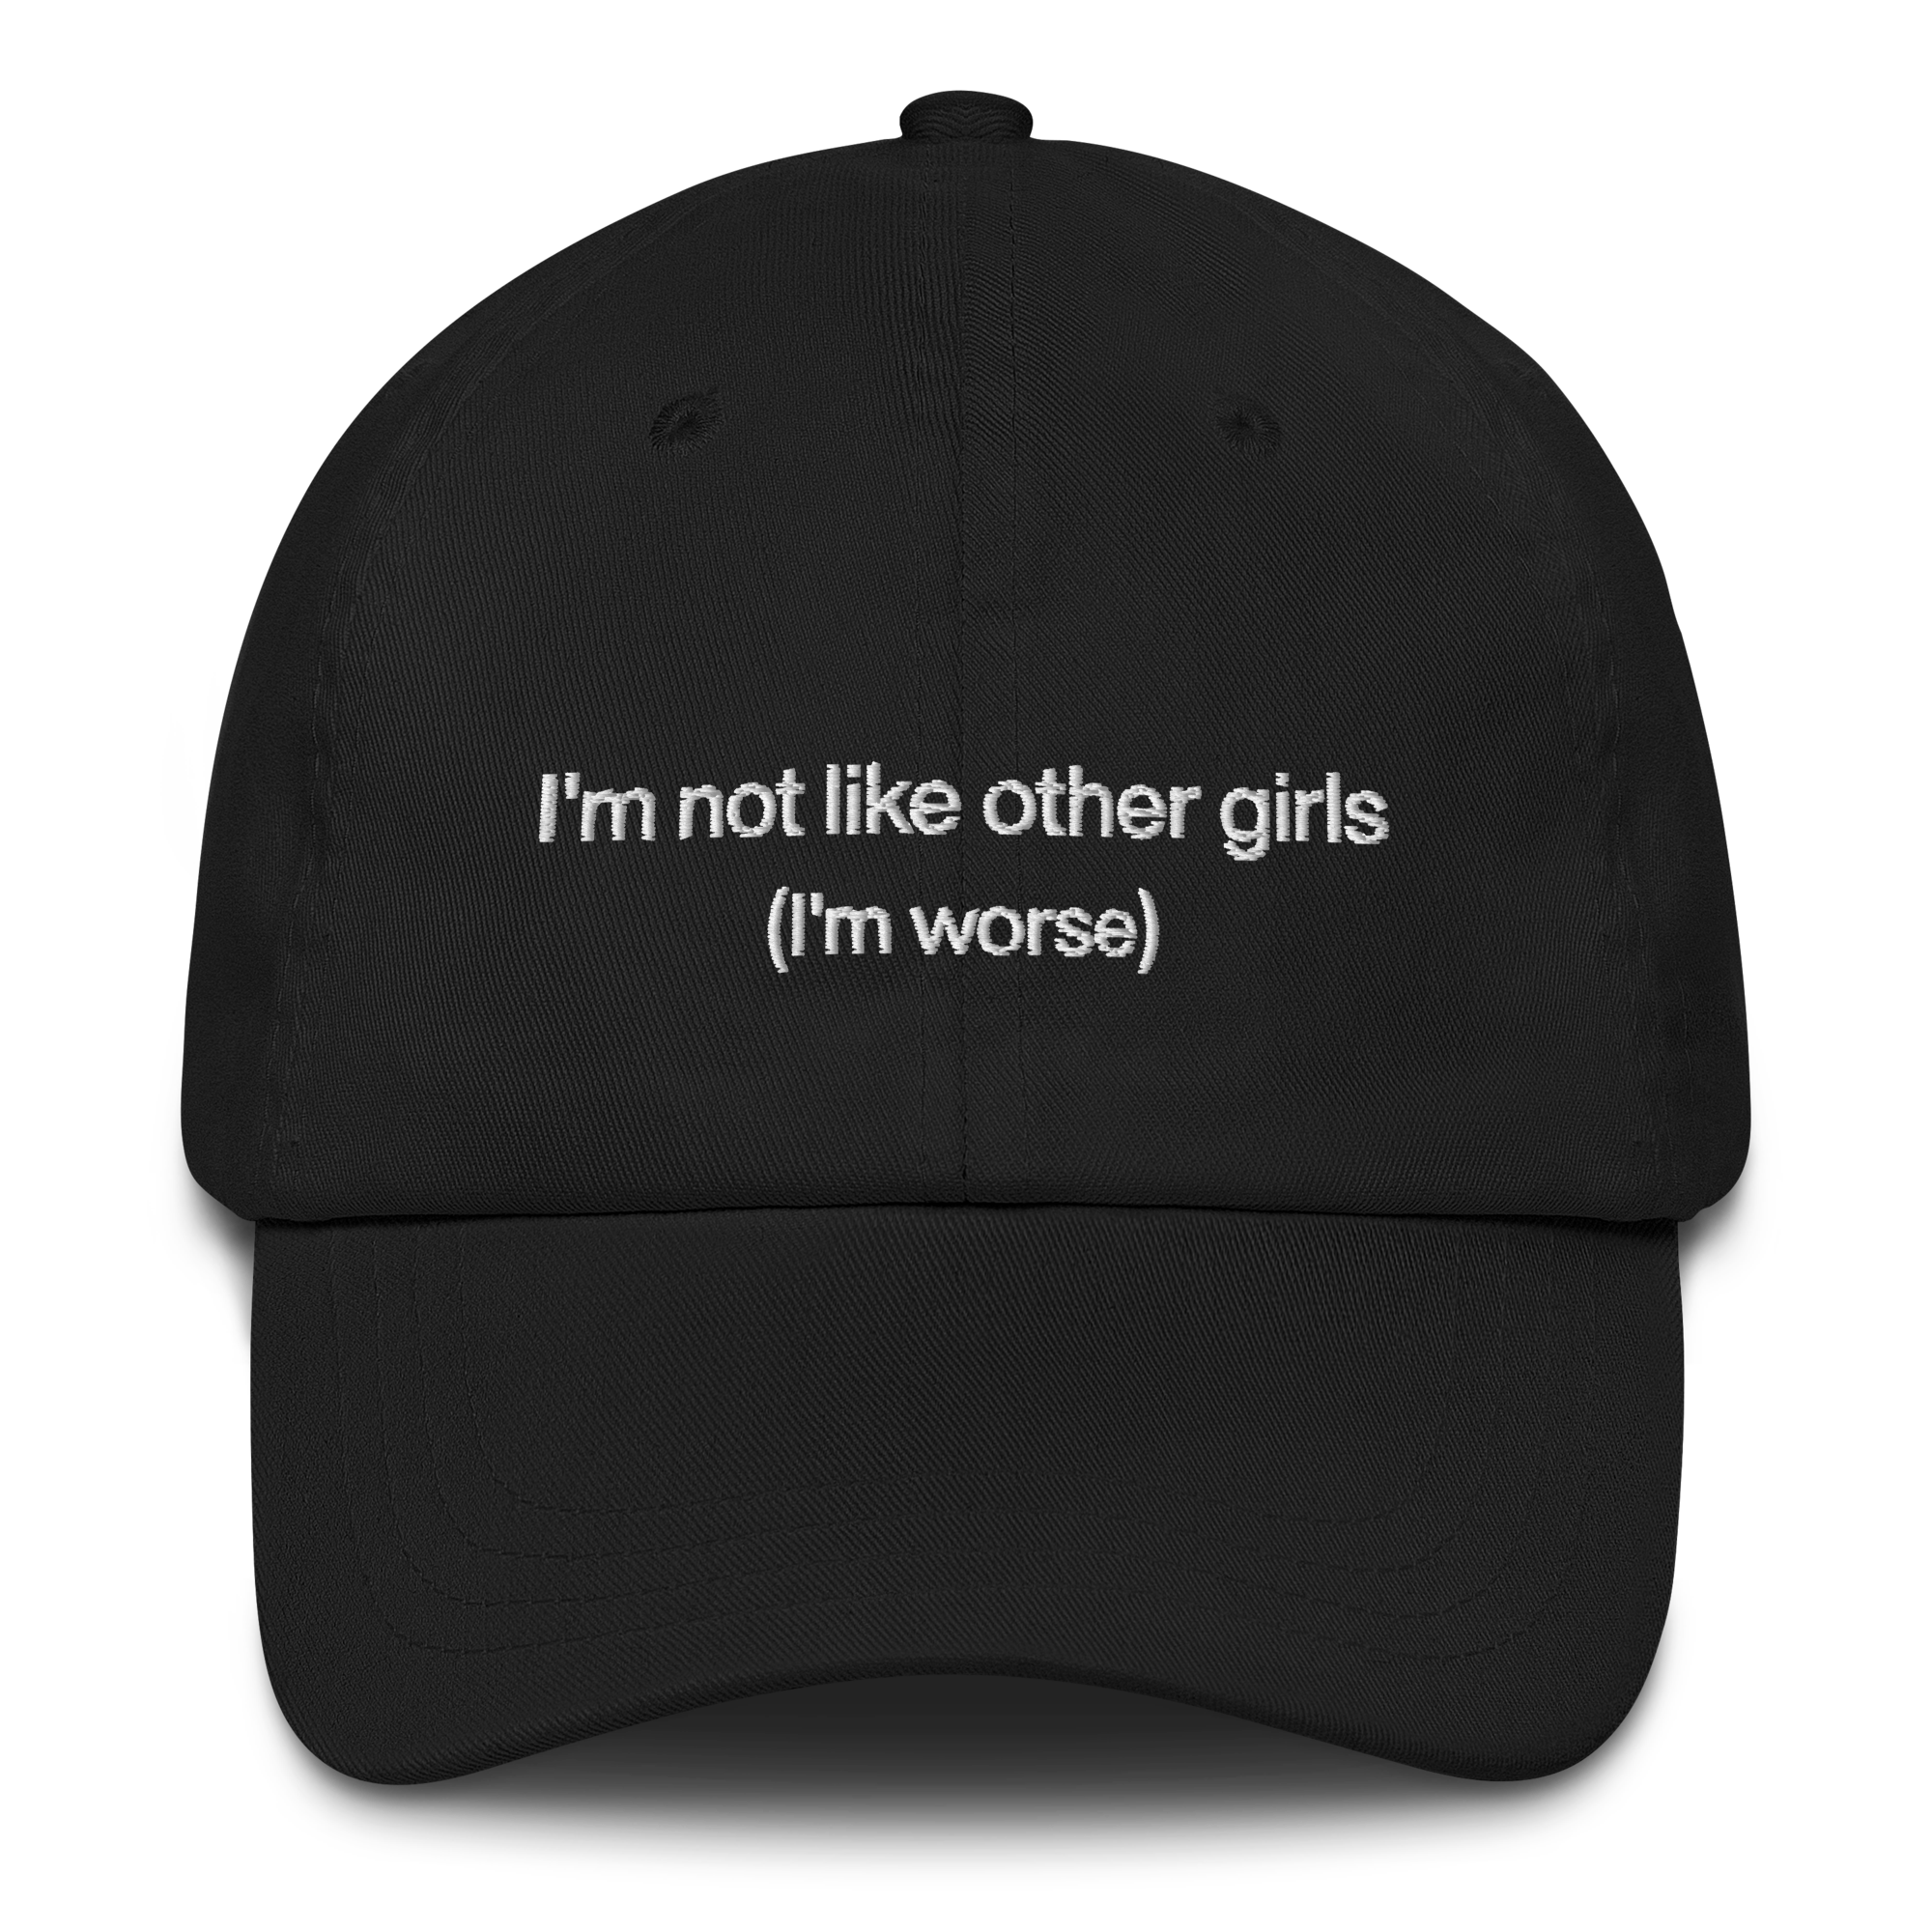 classic-dad-hat-black-front-667b1f1205939.png